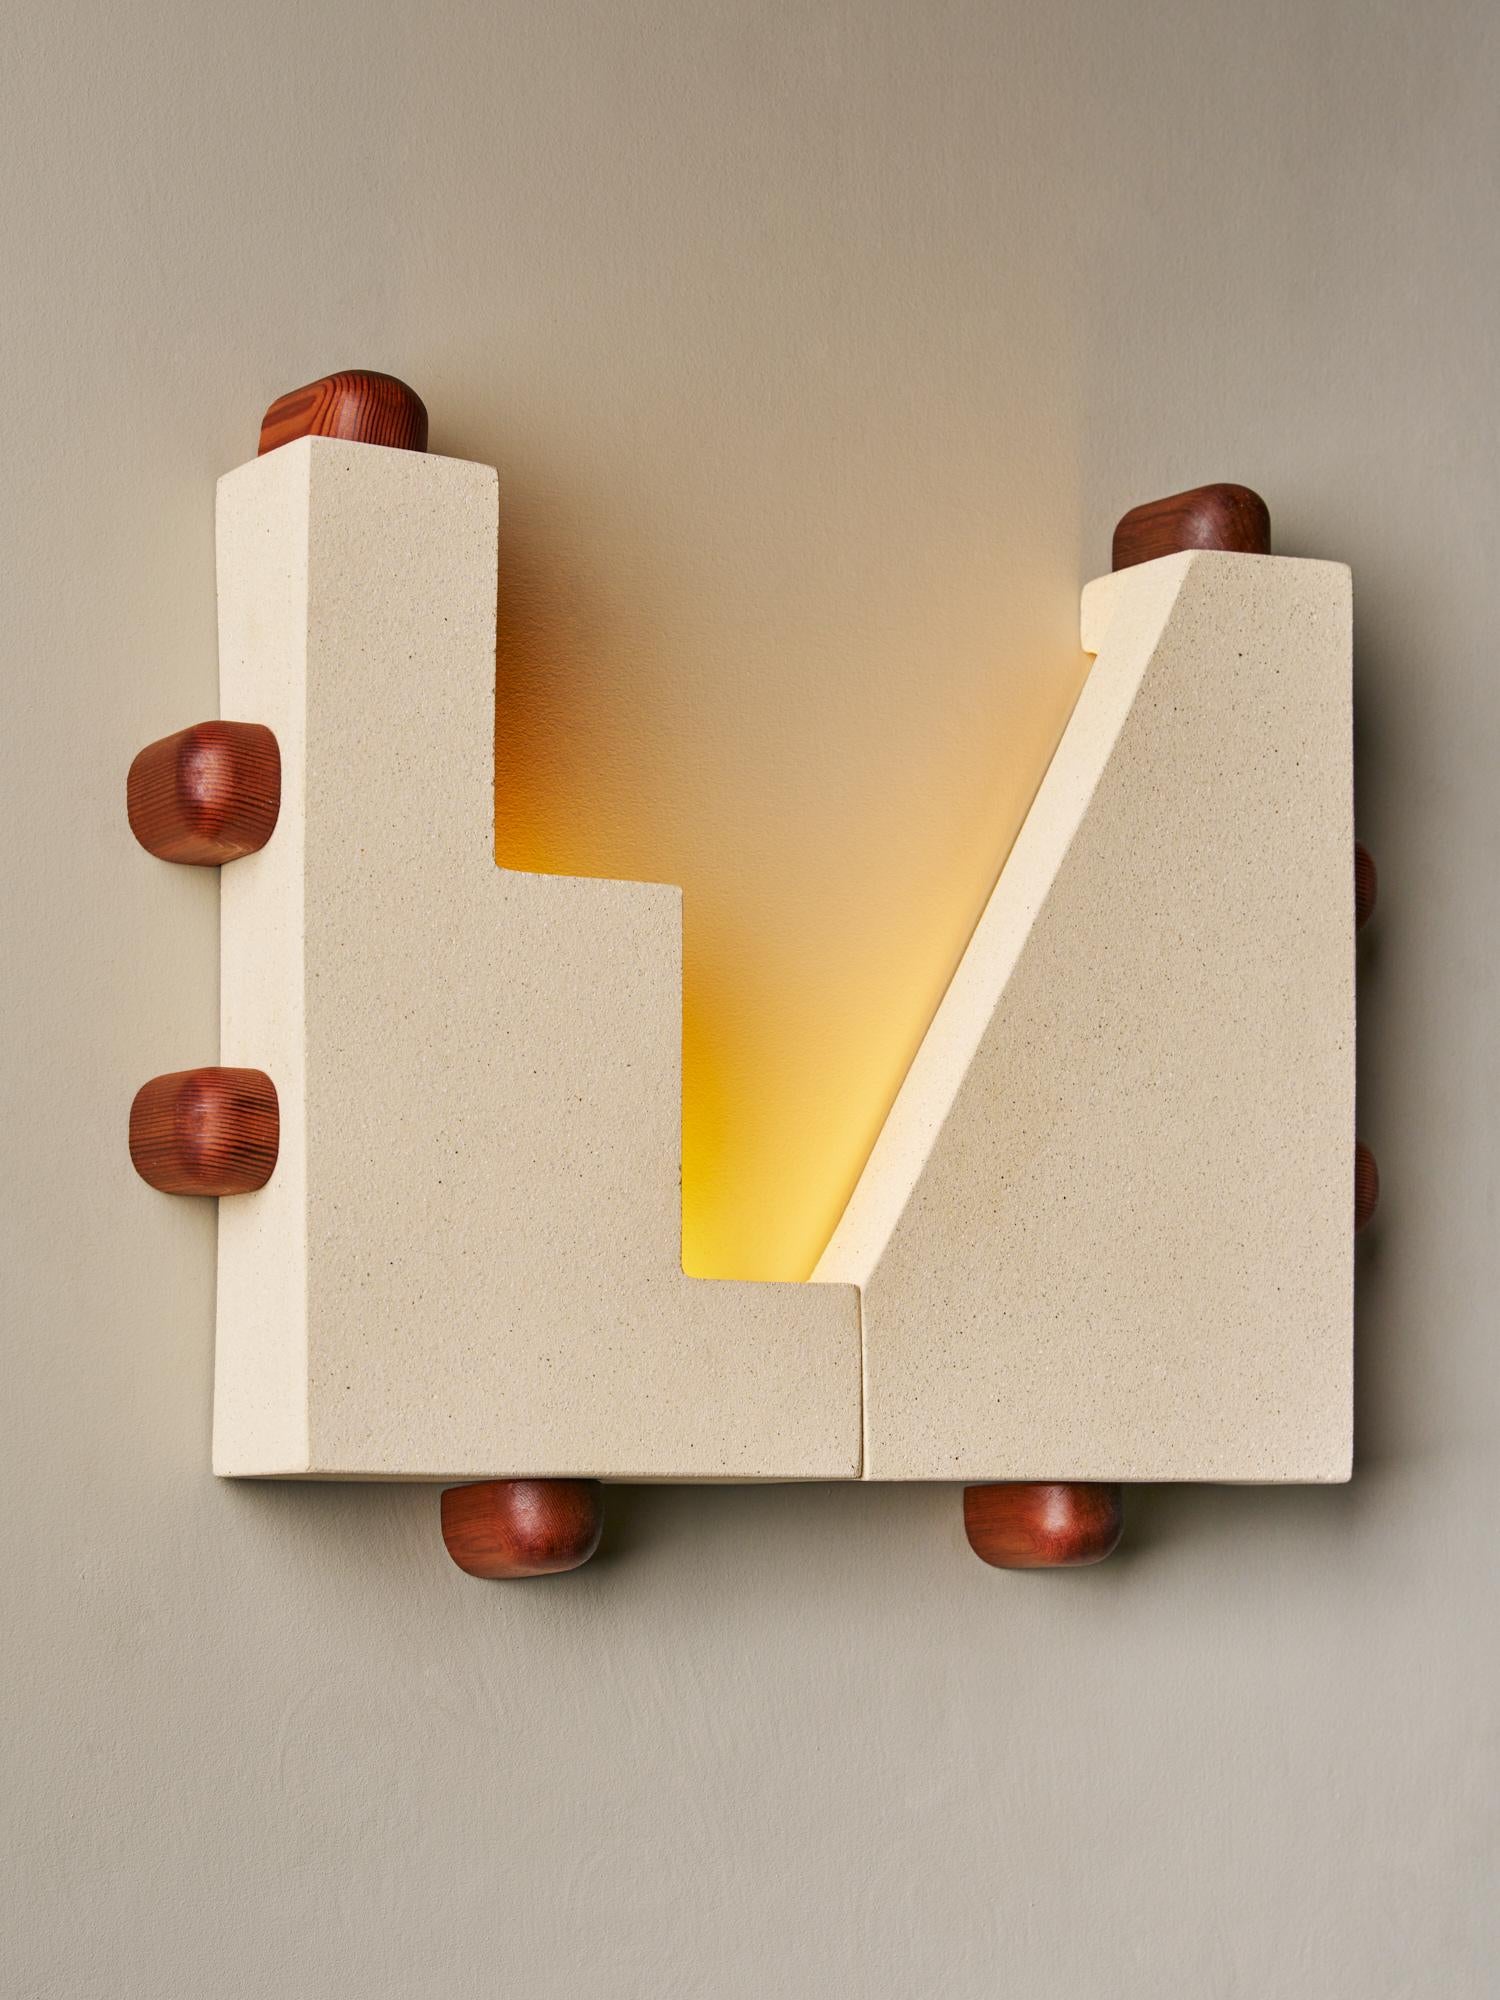 Sierra Sconces in Ceramic, Wood and Brass by Piscina - C1 In New Condition For Sale In Brooklyn, NY